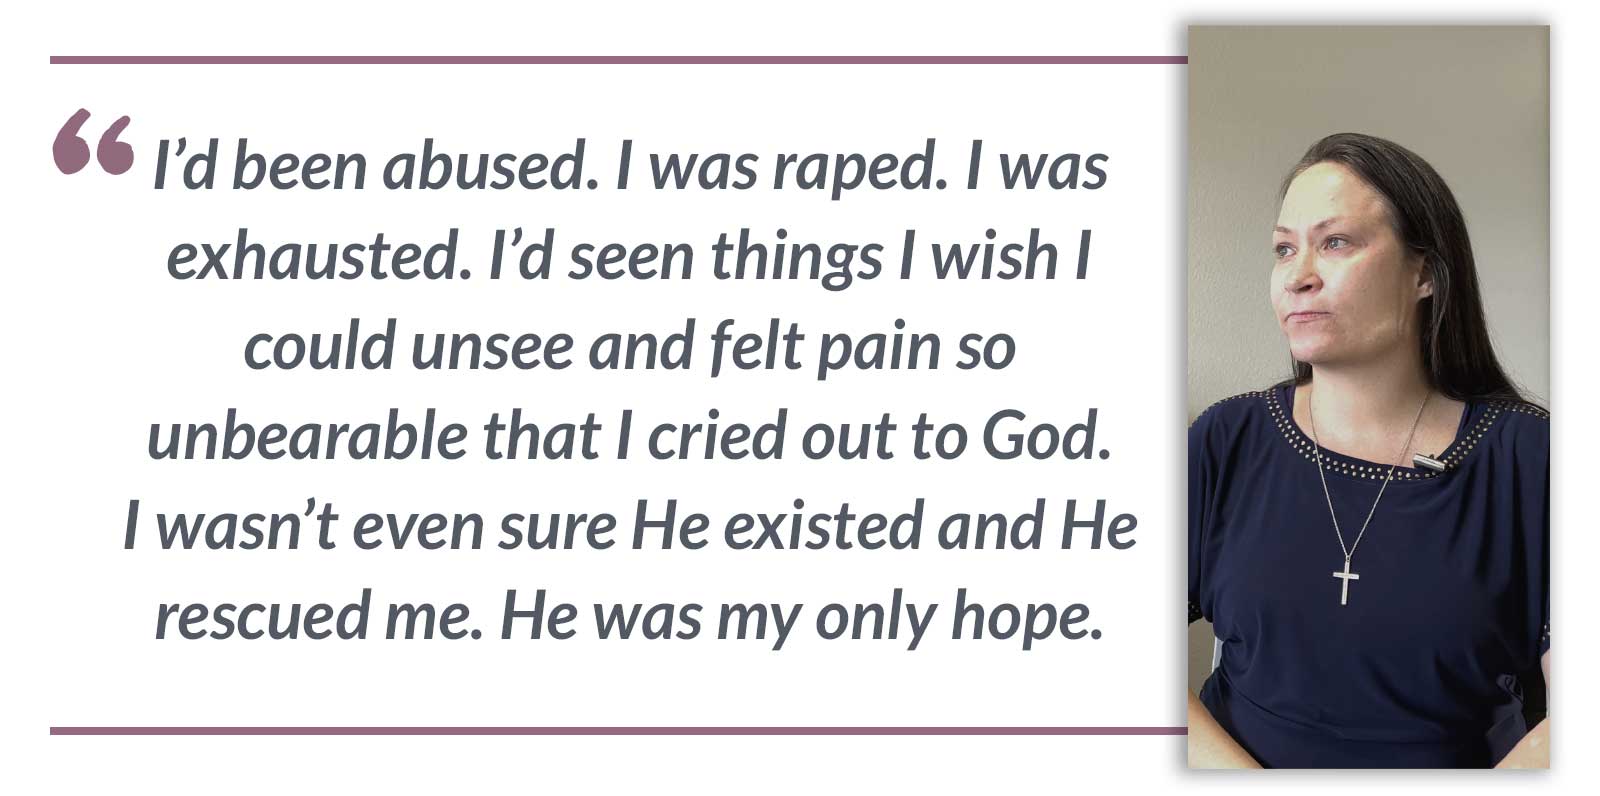 I’d been abused. I was raped. I was exhausted. I’d seen things I wish I could unsee and felt pain so unbearable that I cried out to God. I wasn’t even sure He existed and He rescued me. He was my only hope.-Rosie